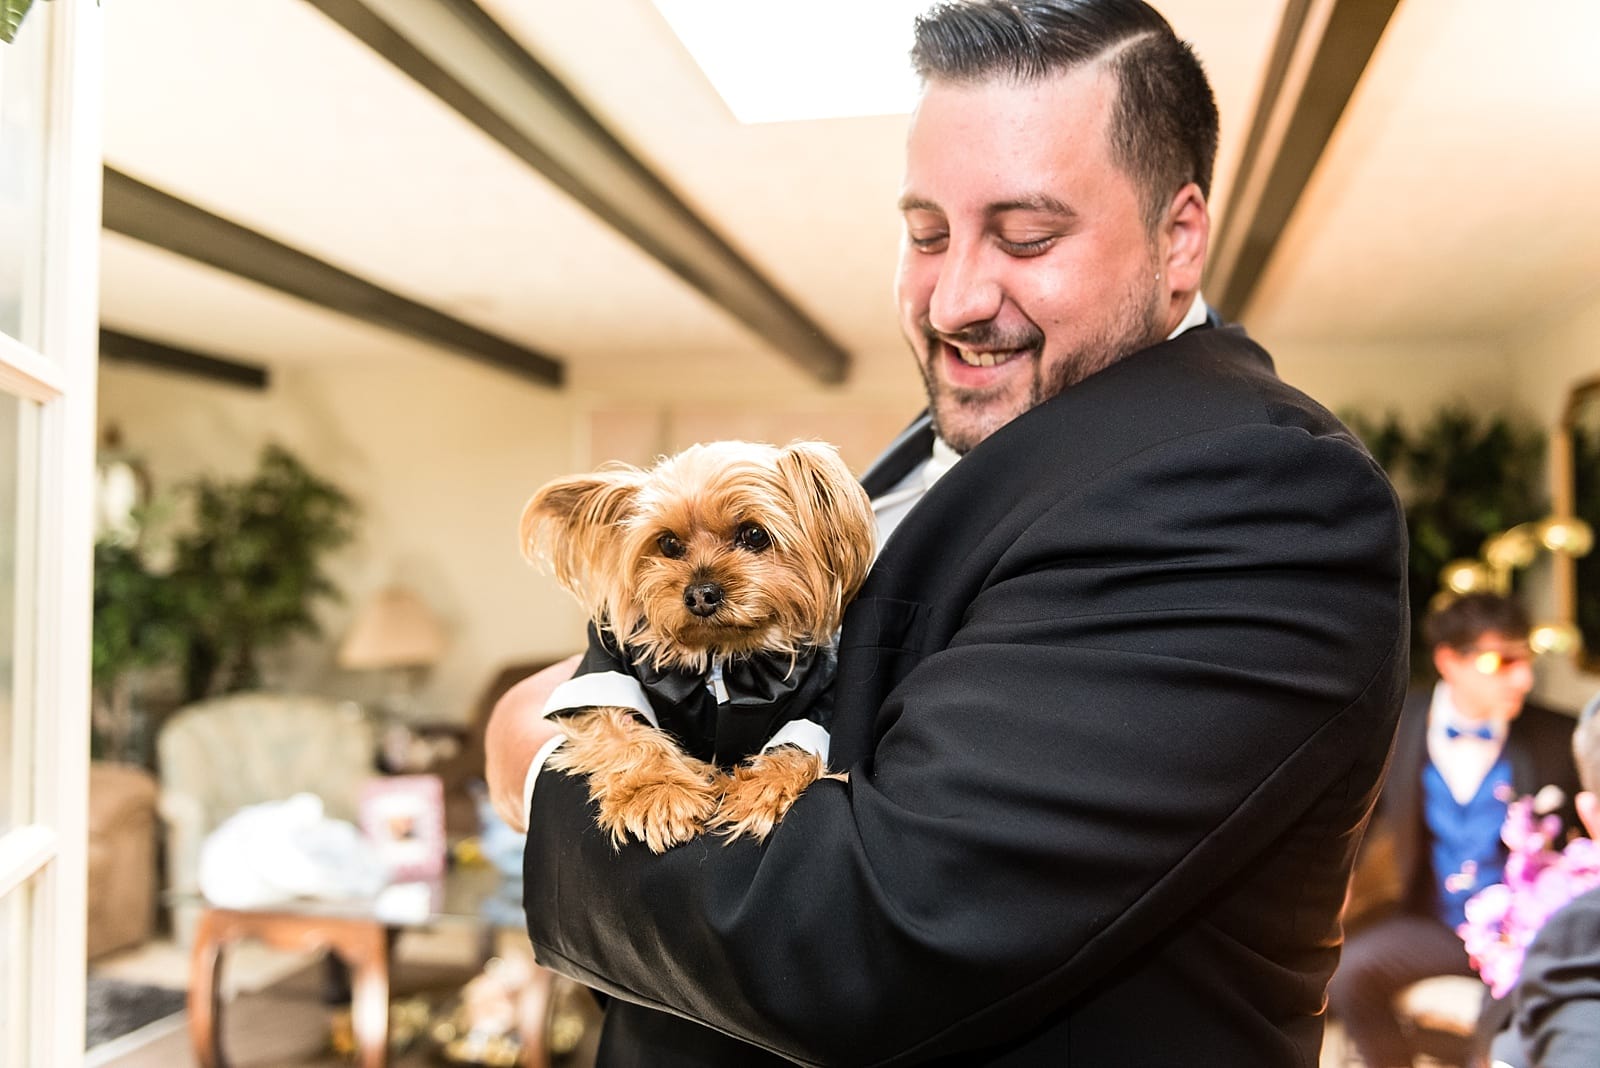 Frank poses with his dog, dressed in matching tuxedos